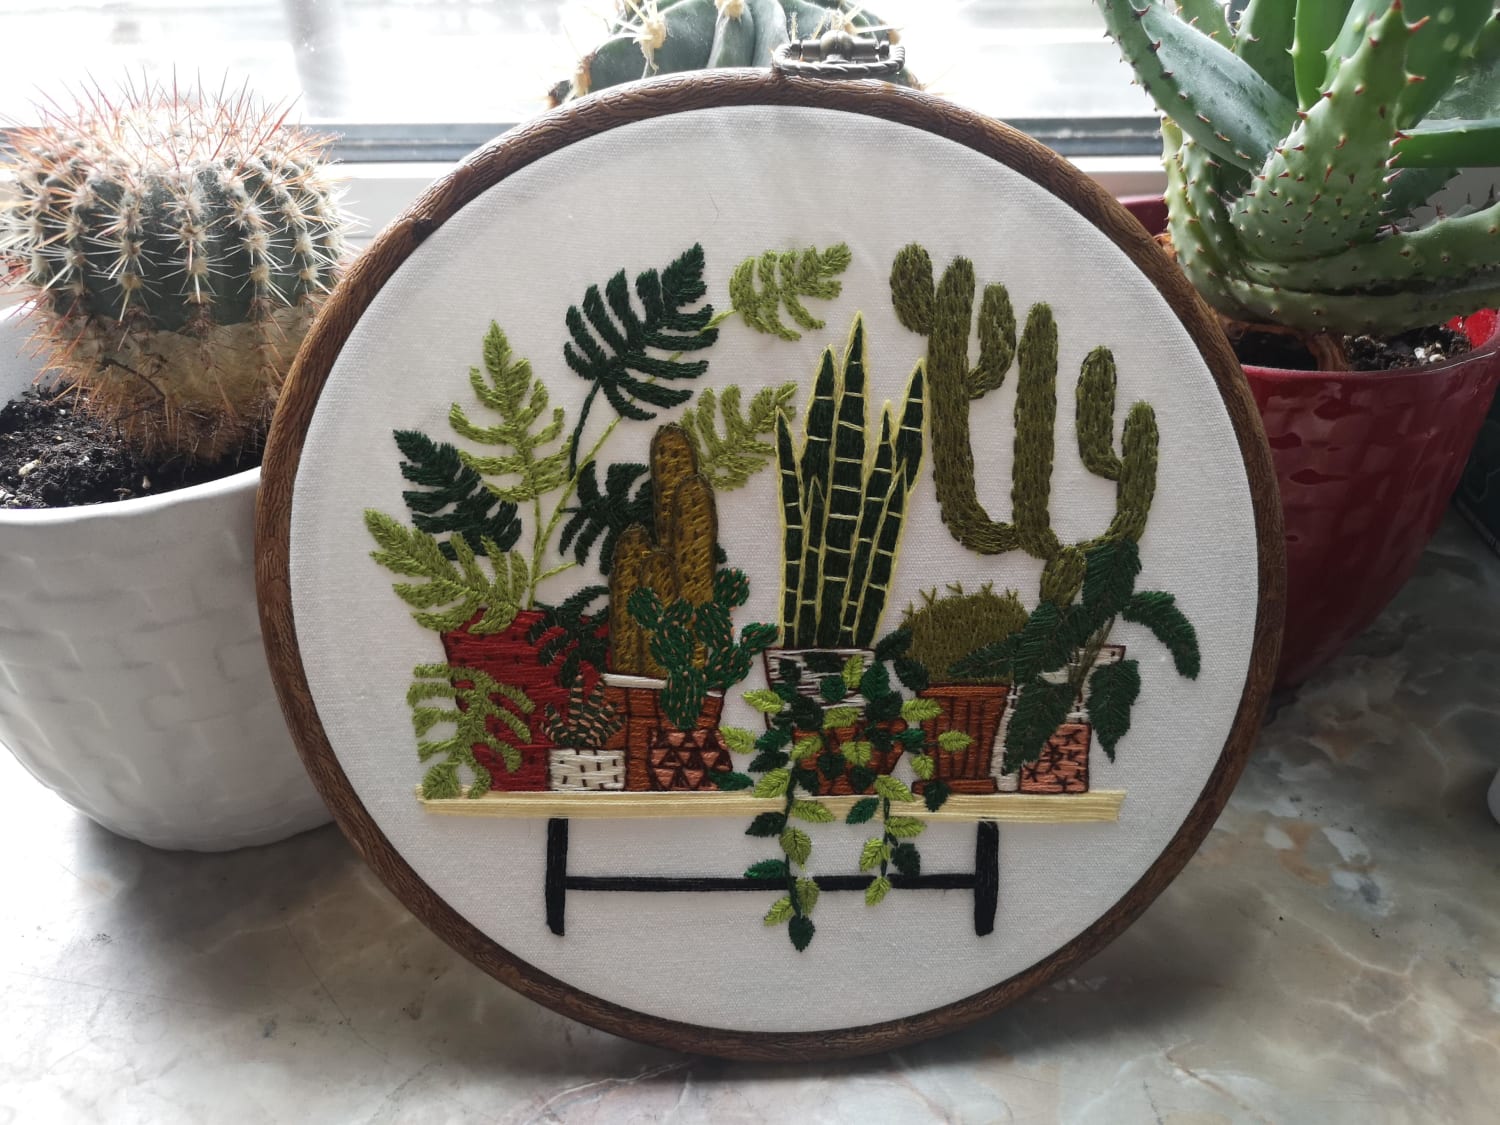 This is my first ever embroidery. Left my cross stitch comfort zone and had a great time. This was so much fun.